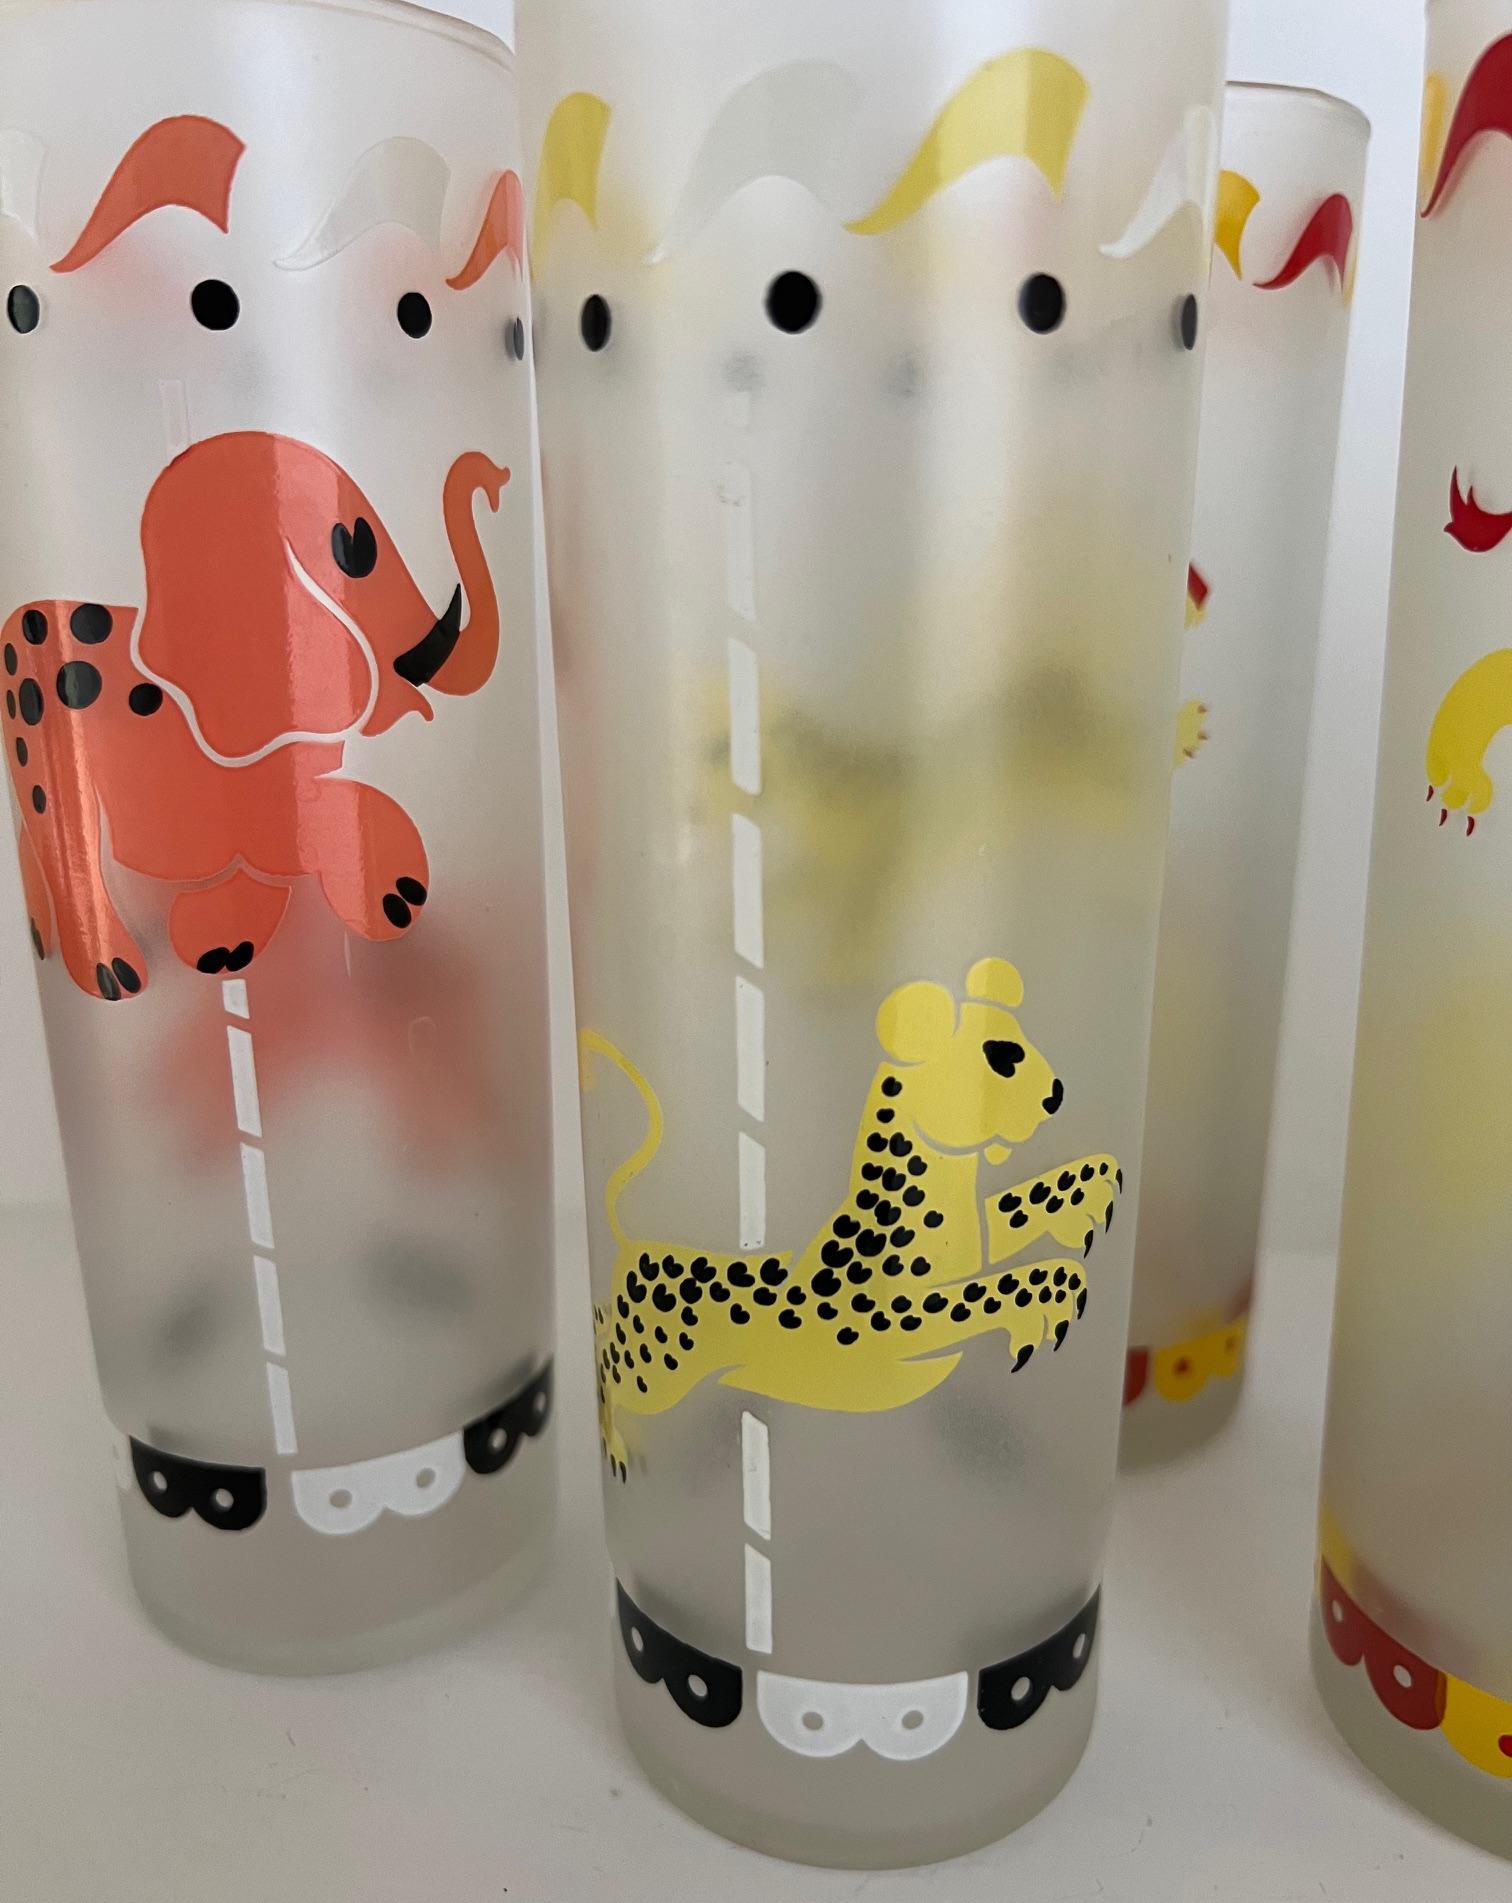 Vintage set of blown glass Libbey glasses, each in a different color and with a different carousel animal. The animals are depicted in enamels on a frosted ground with one in a raised position and another in a lowered position on either side of each